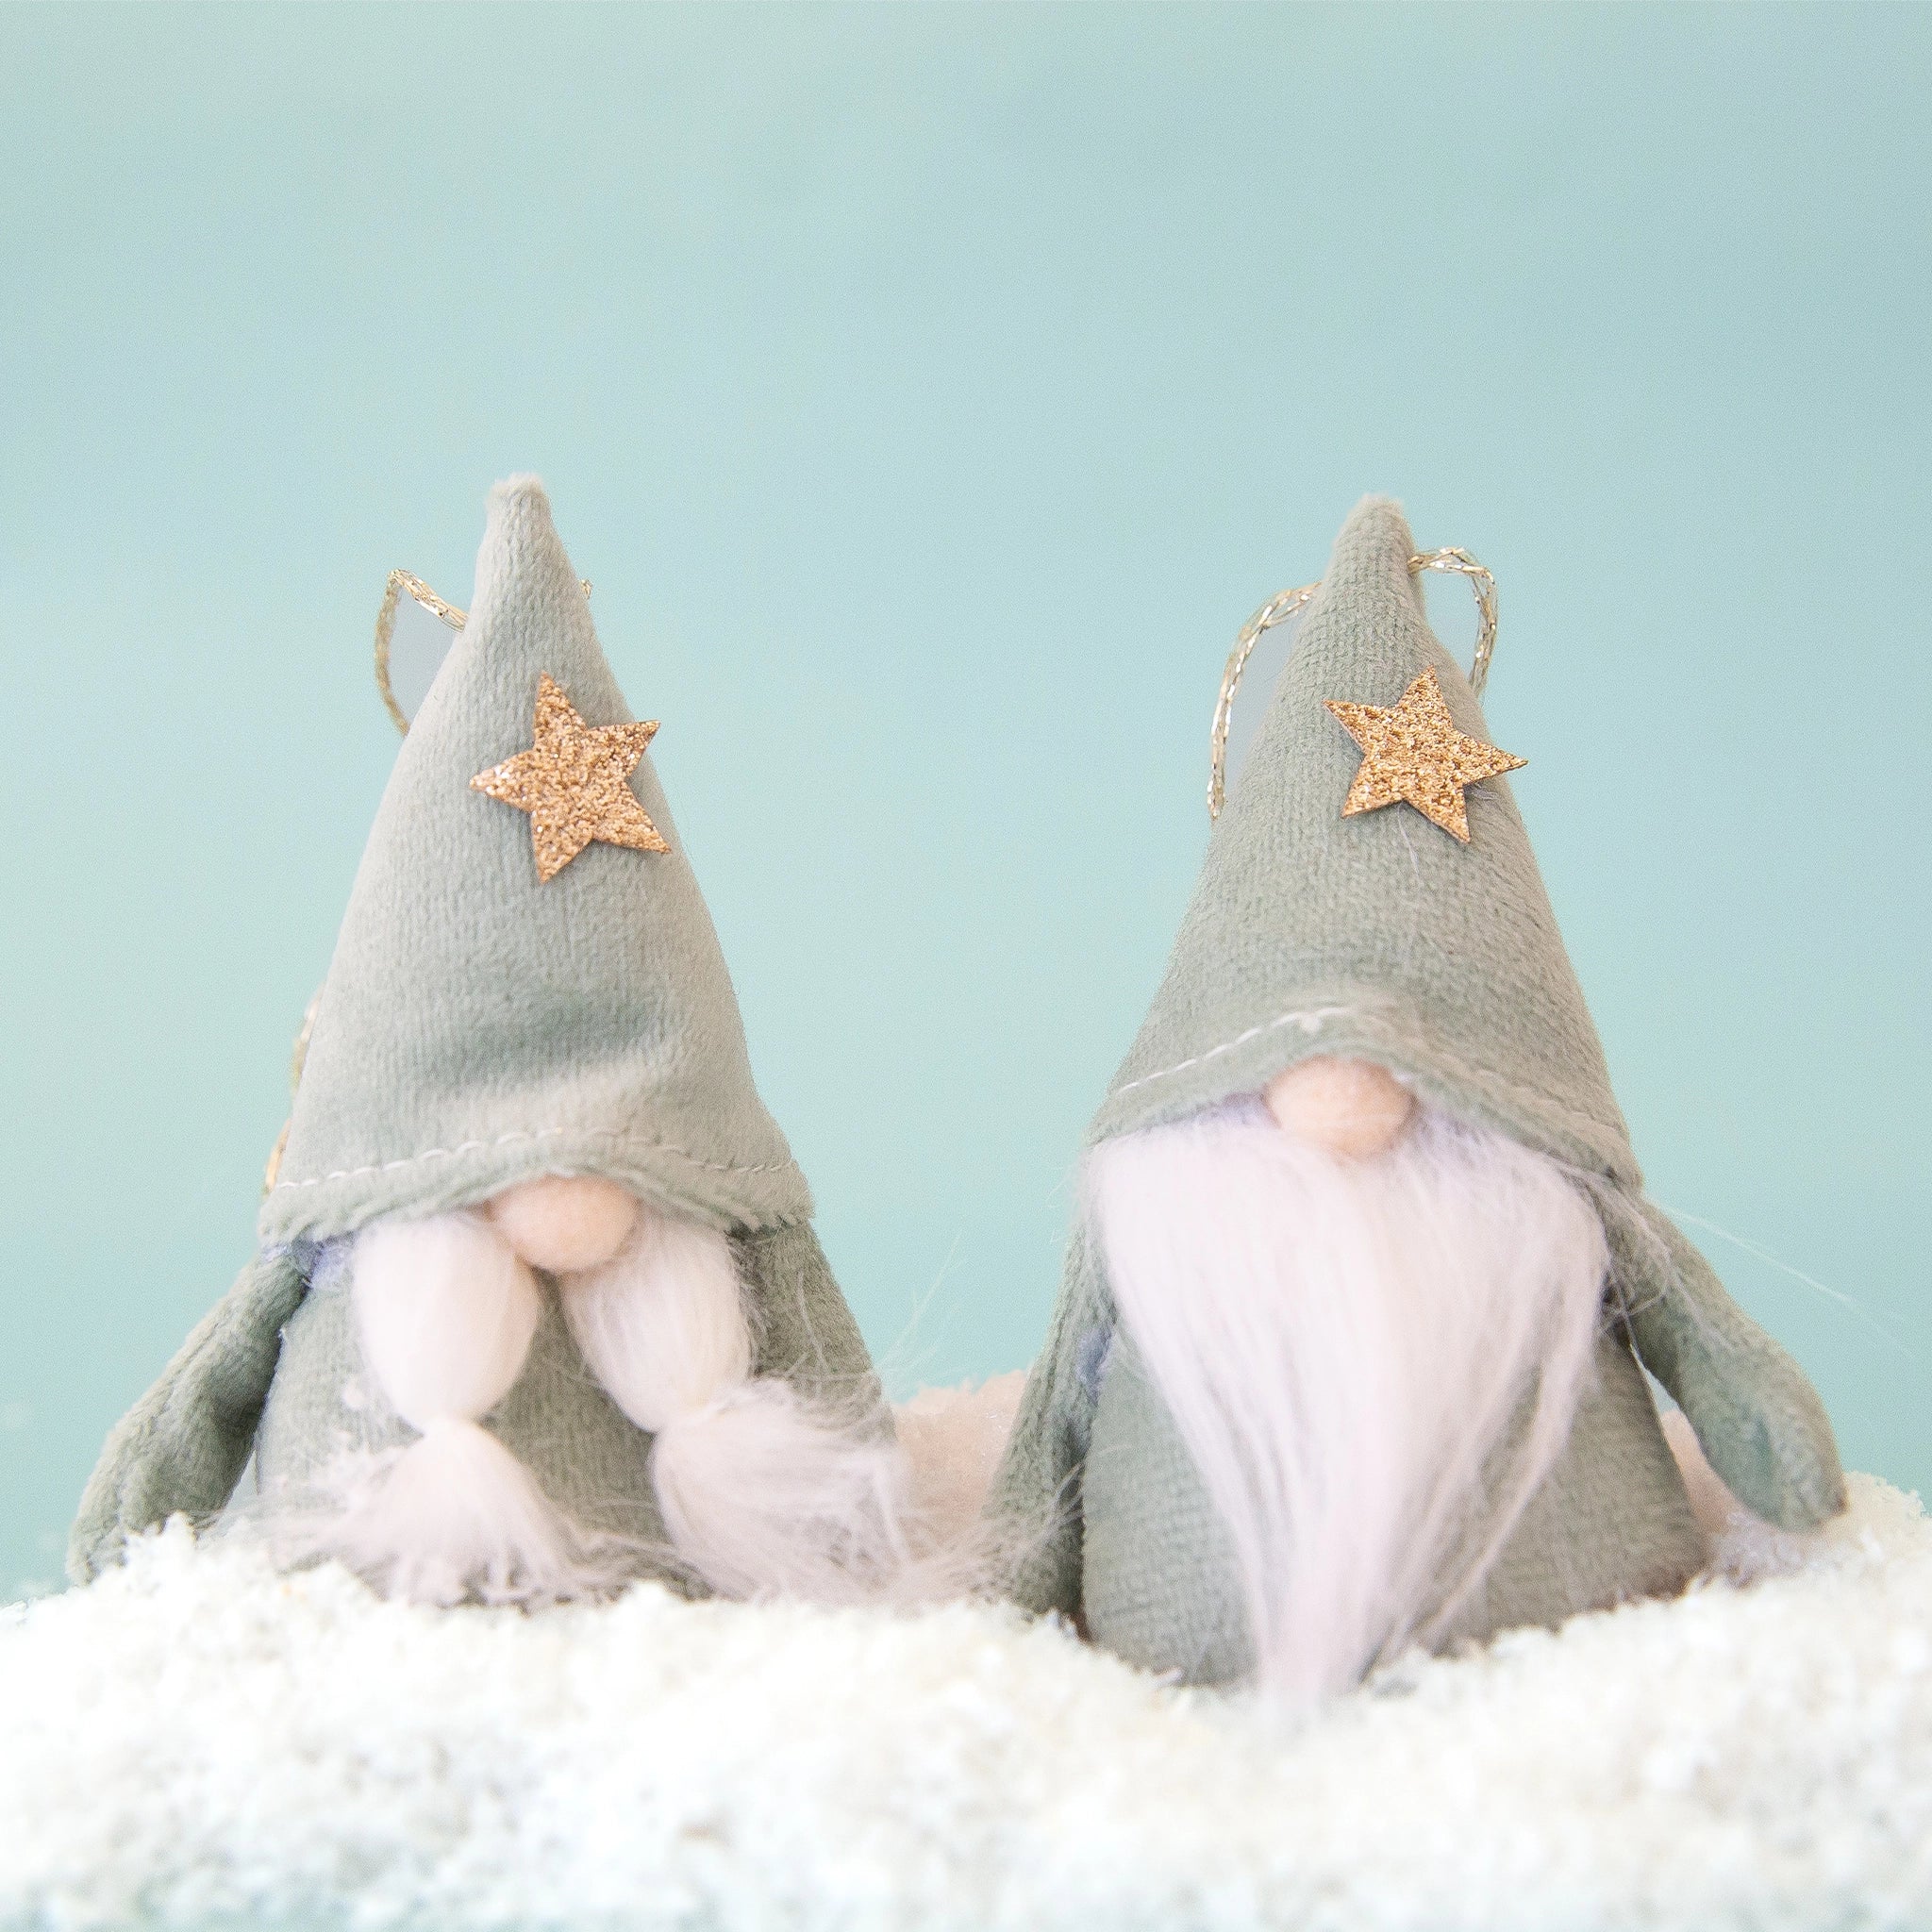 On a light blue background is two gnome ornaments with velour green outfits and hats on along with a gold glitter star on their hats. One gnome has a pigtail beard and the other has a free flowing beard. 